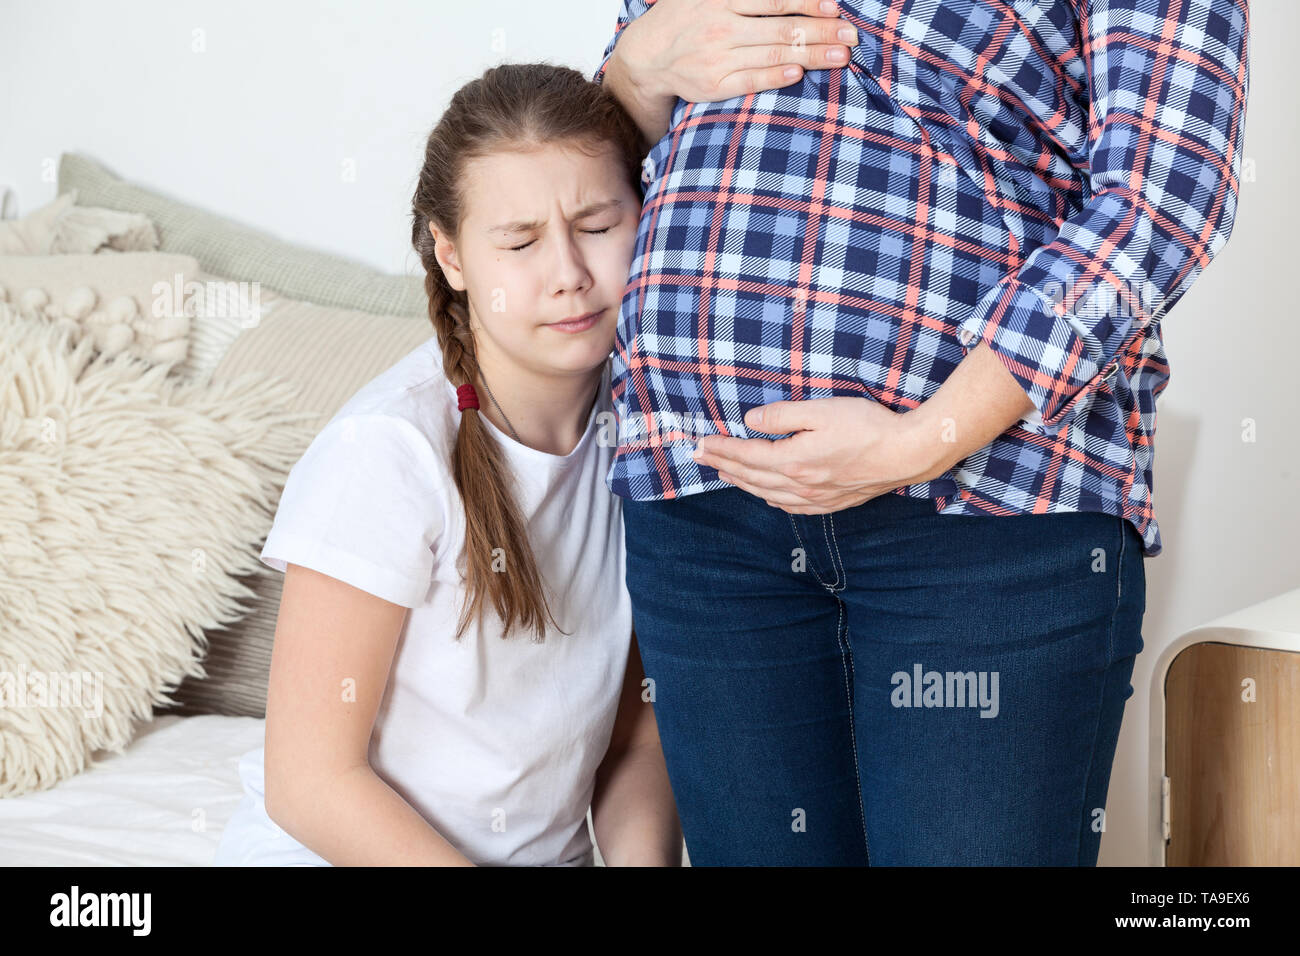 Young girl is not happy about new sibling, closing eyes and sobbing along her pregnant mother Stock Photo